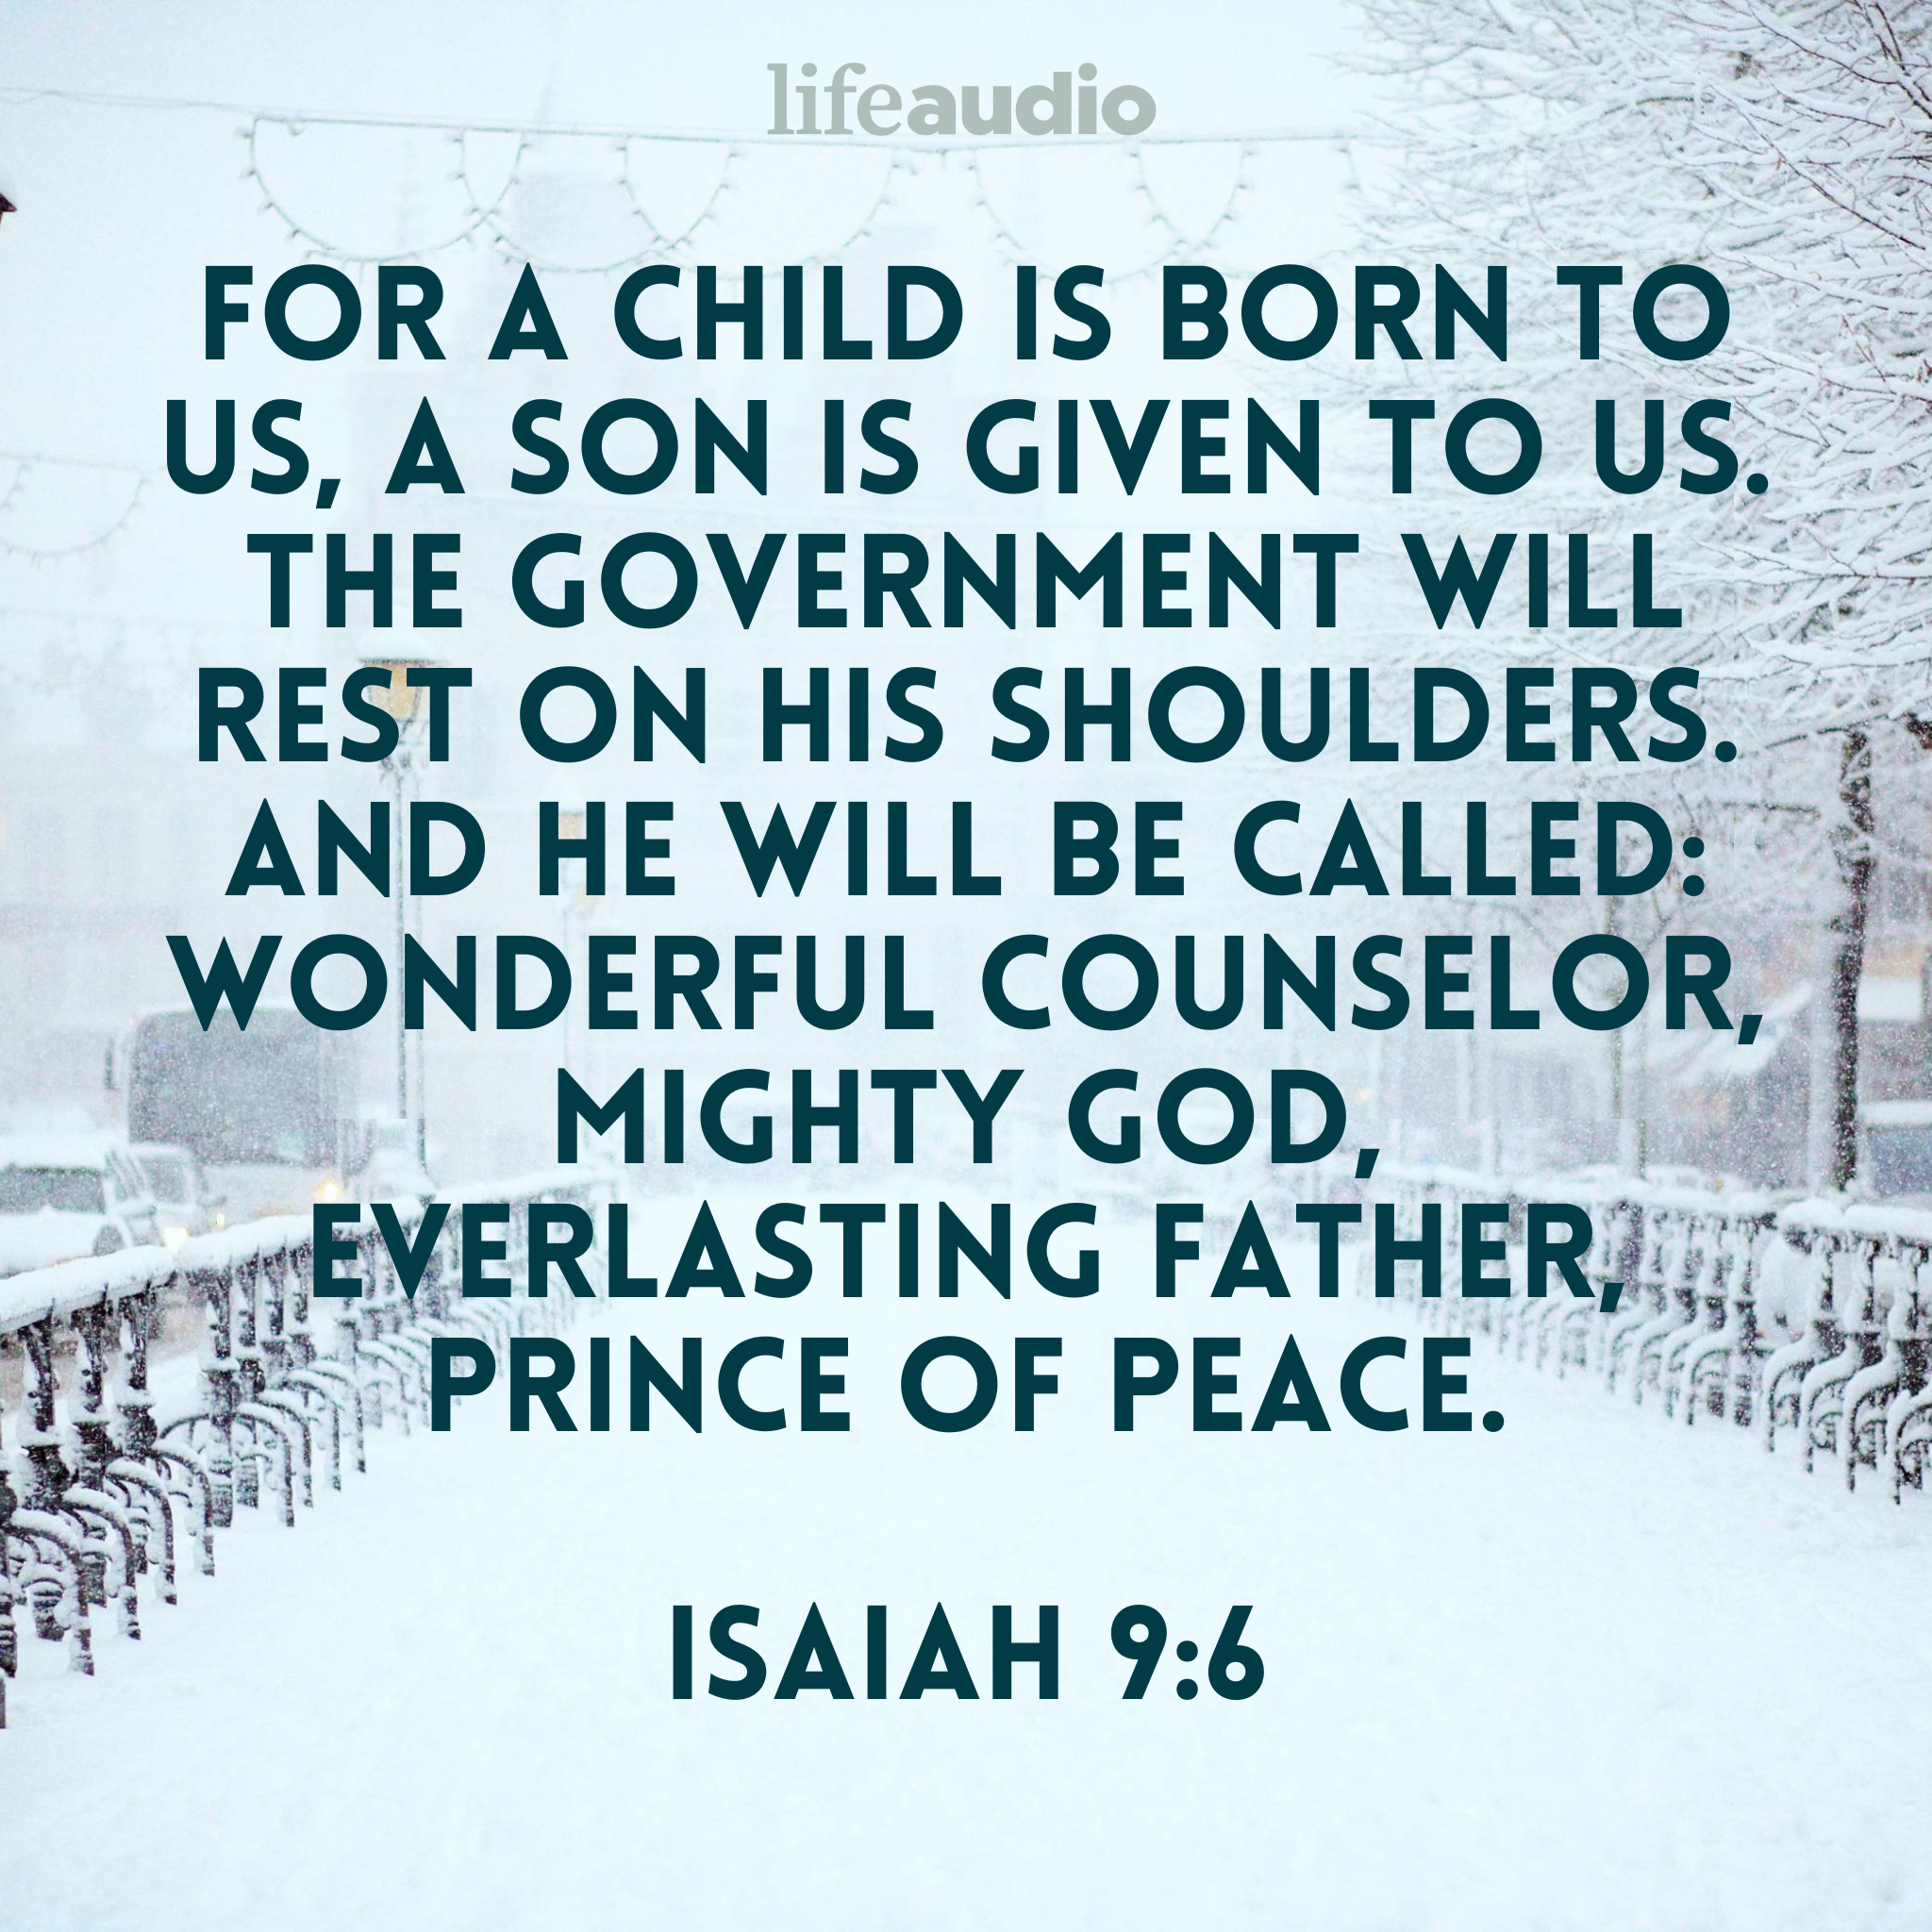 Christmas: The Promise That Good Is Coming (Isaiah 9:6)